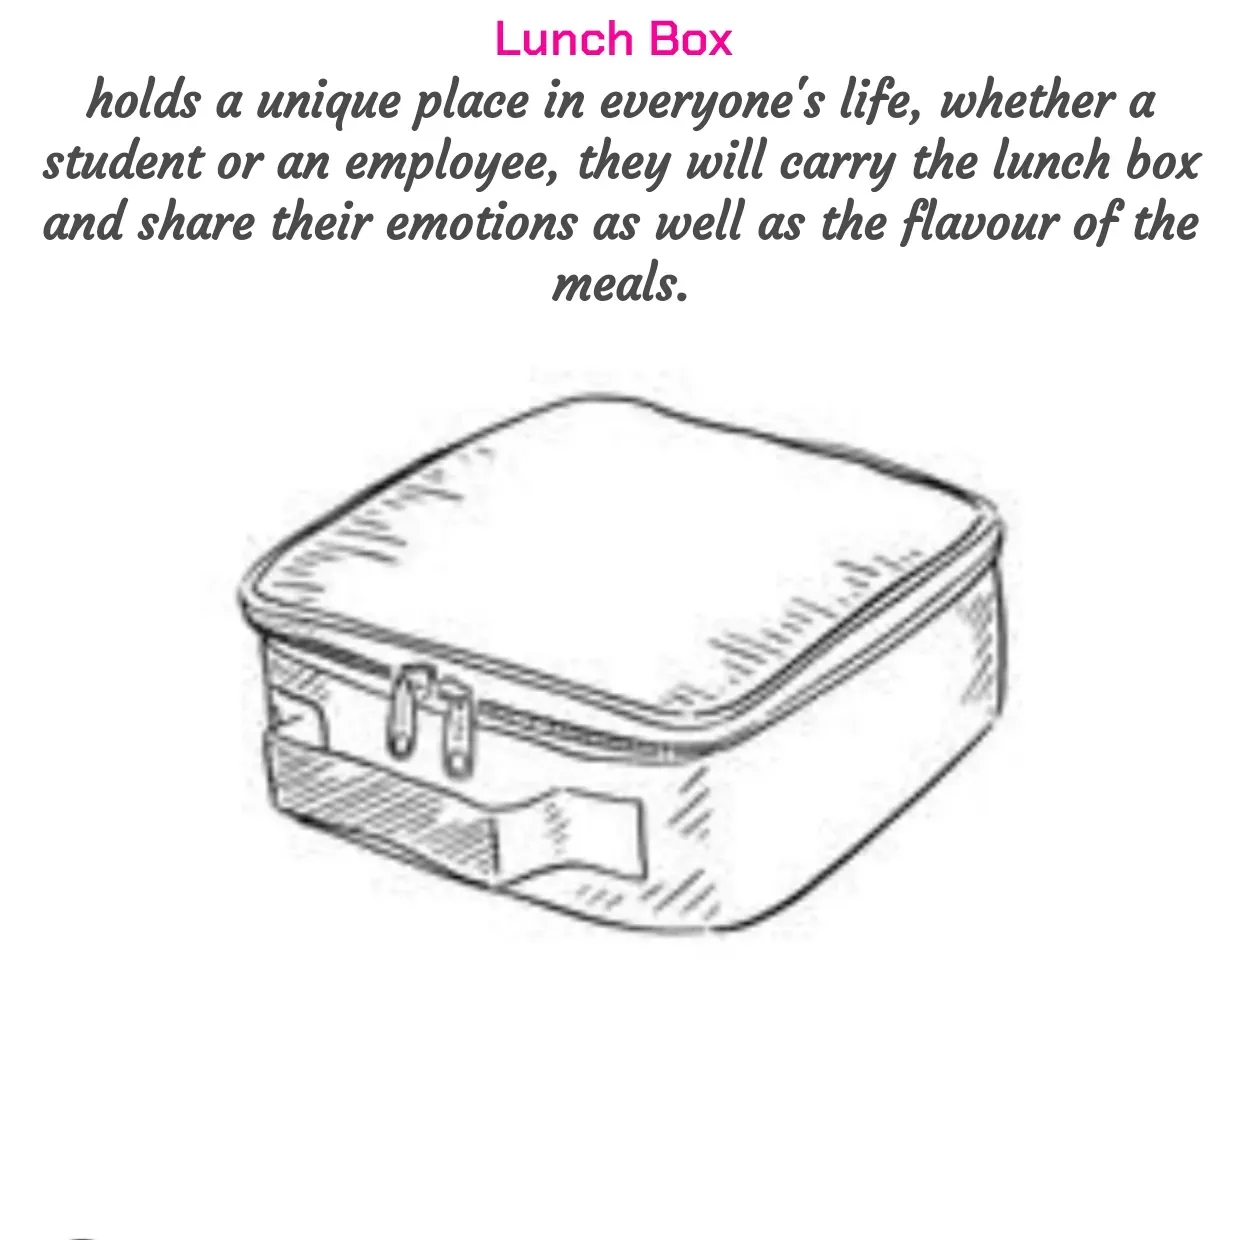 Quote by Peace finder - Lunch Box 
holds a unique place in everyone's life, whether a student or an employee, they will carry the lunch box and share their emotions as well as the flavour of the meals. - Made using Quotes Creator App, Post Maker App